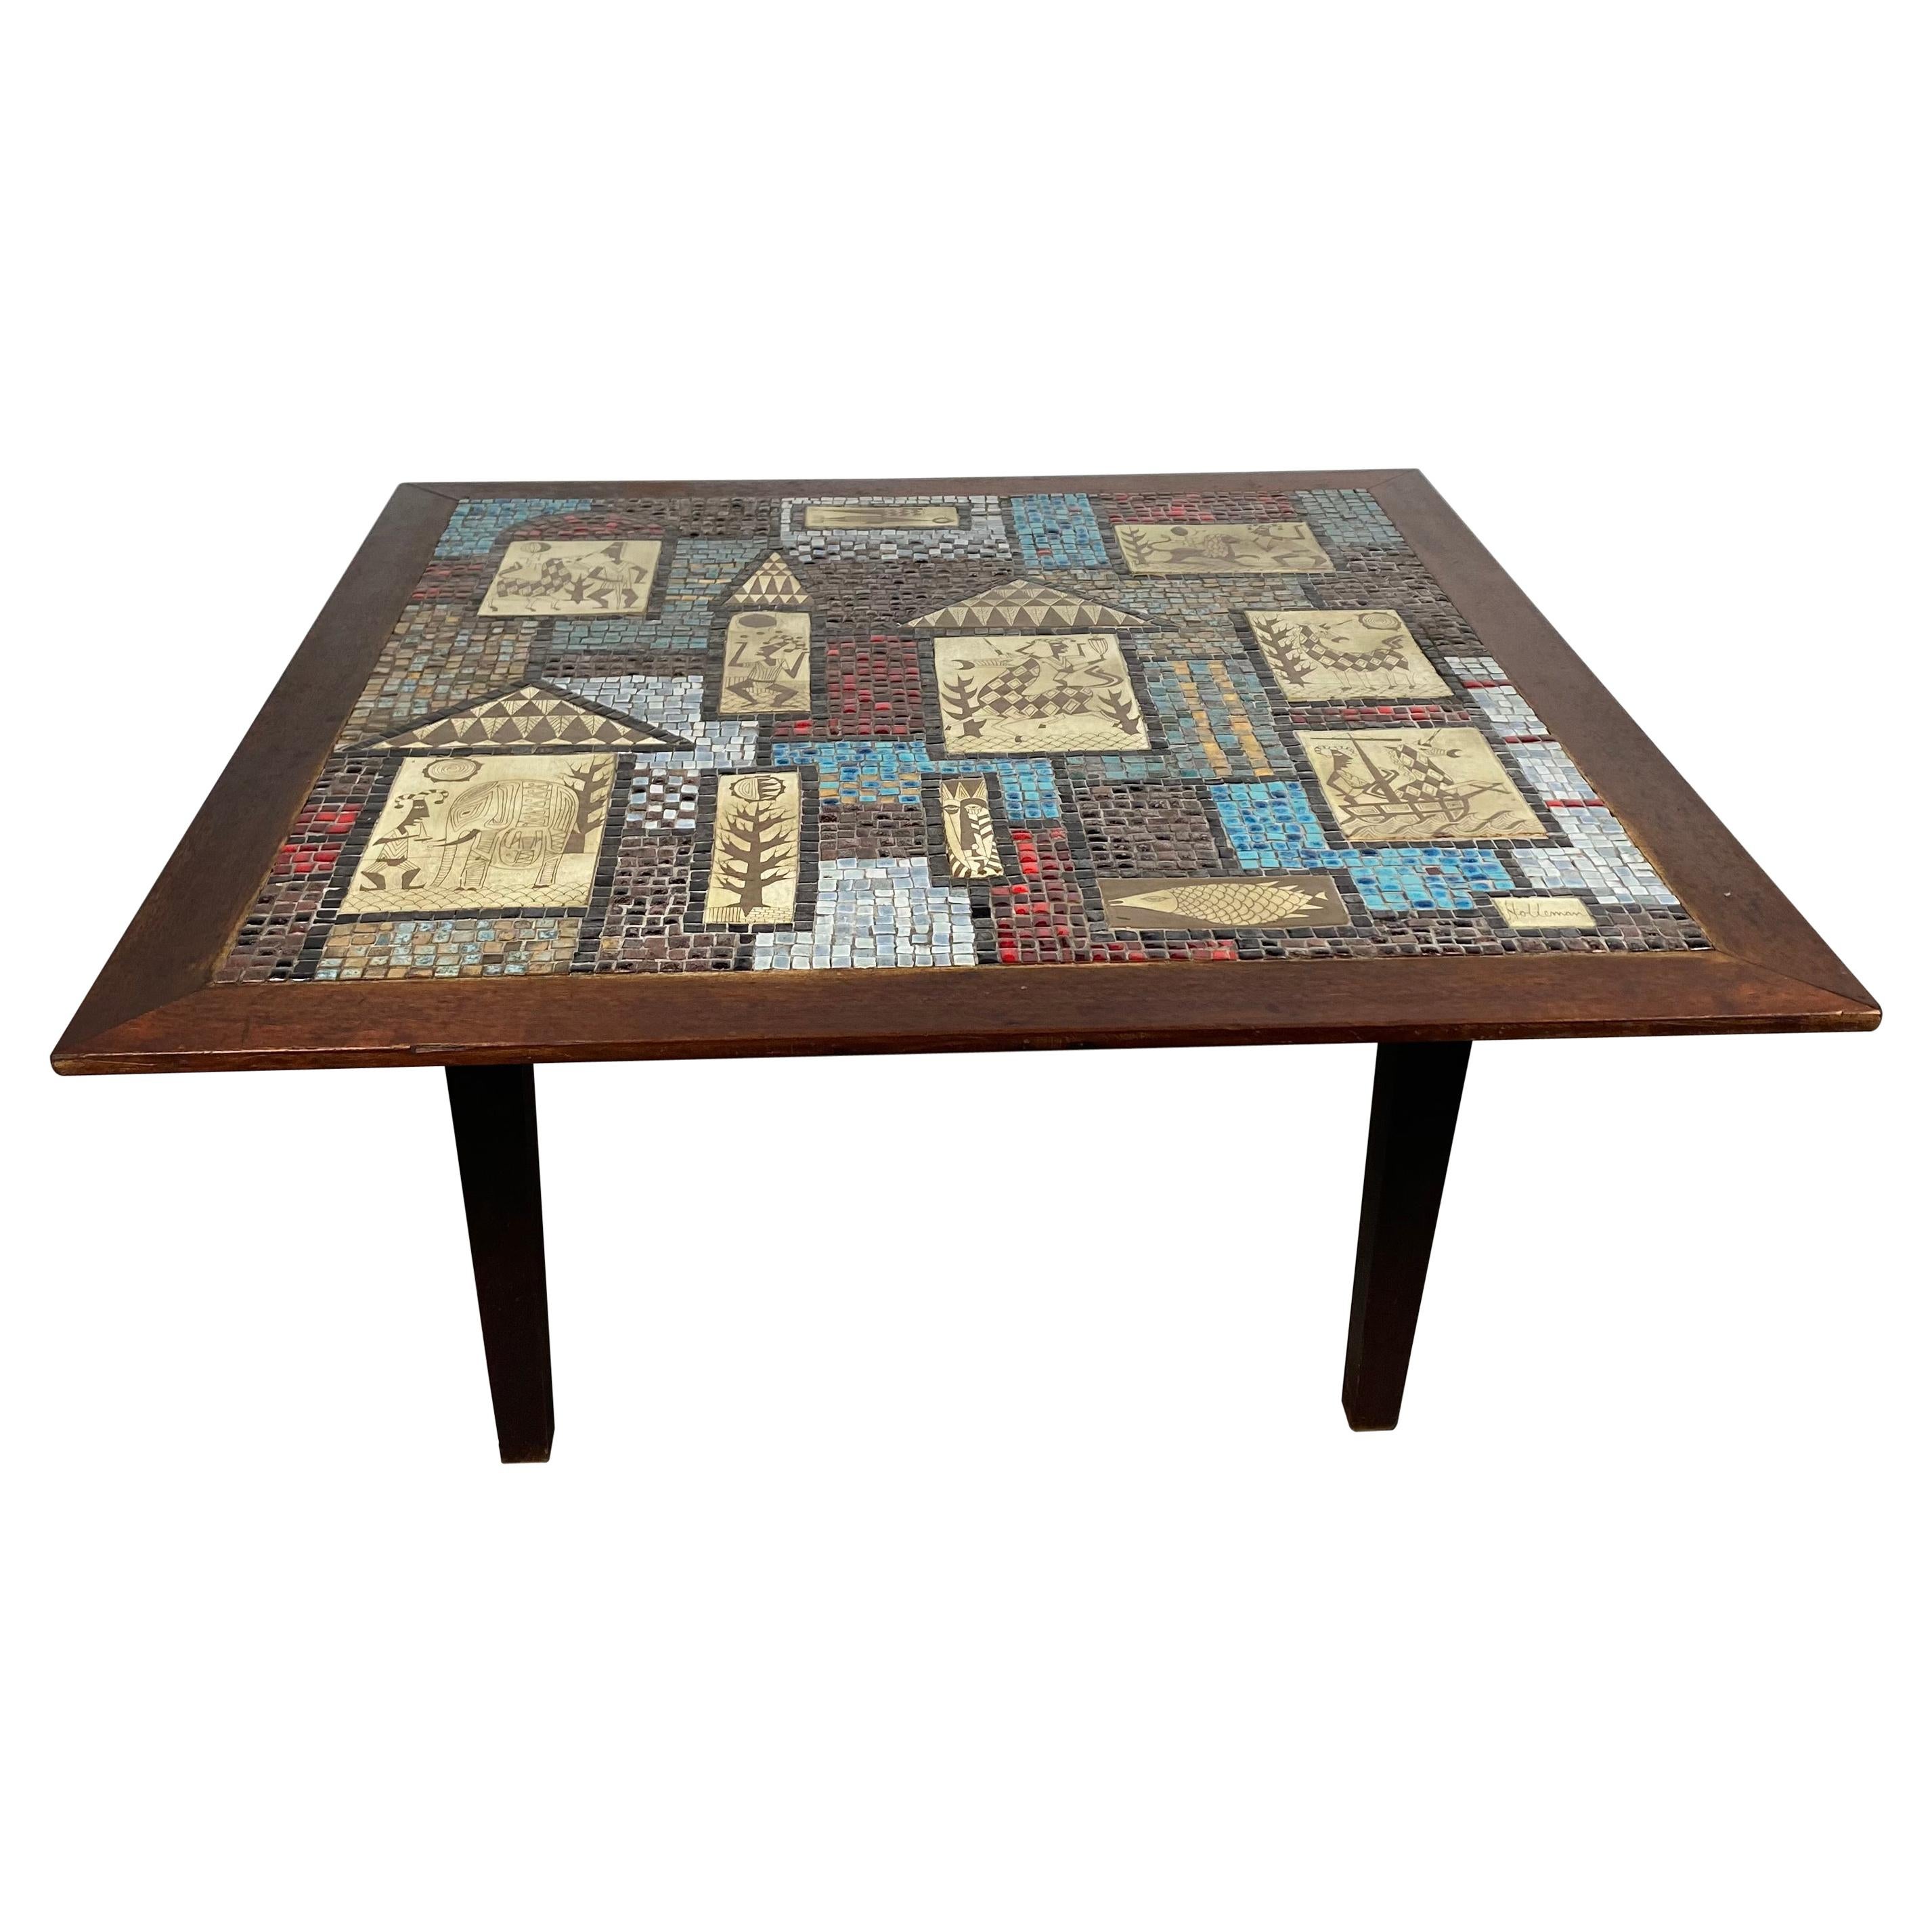 Modernist Large Mosaic Tile Top Cocktail Table by David Holleman